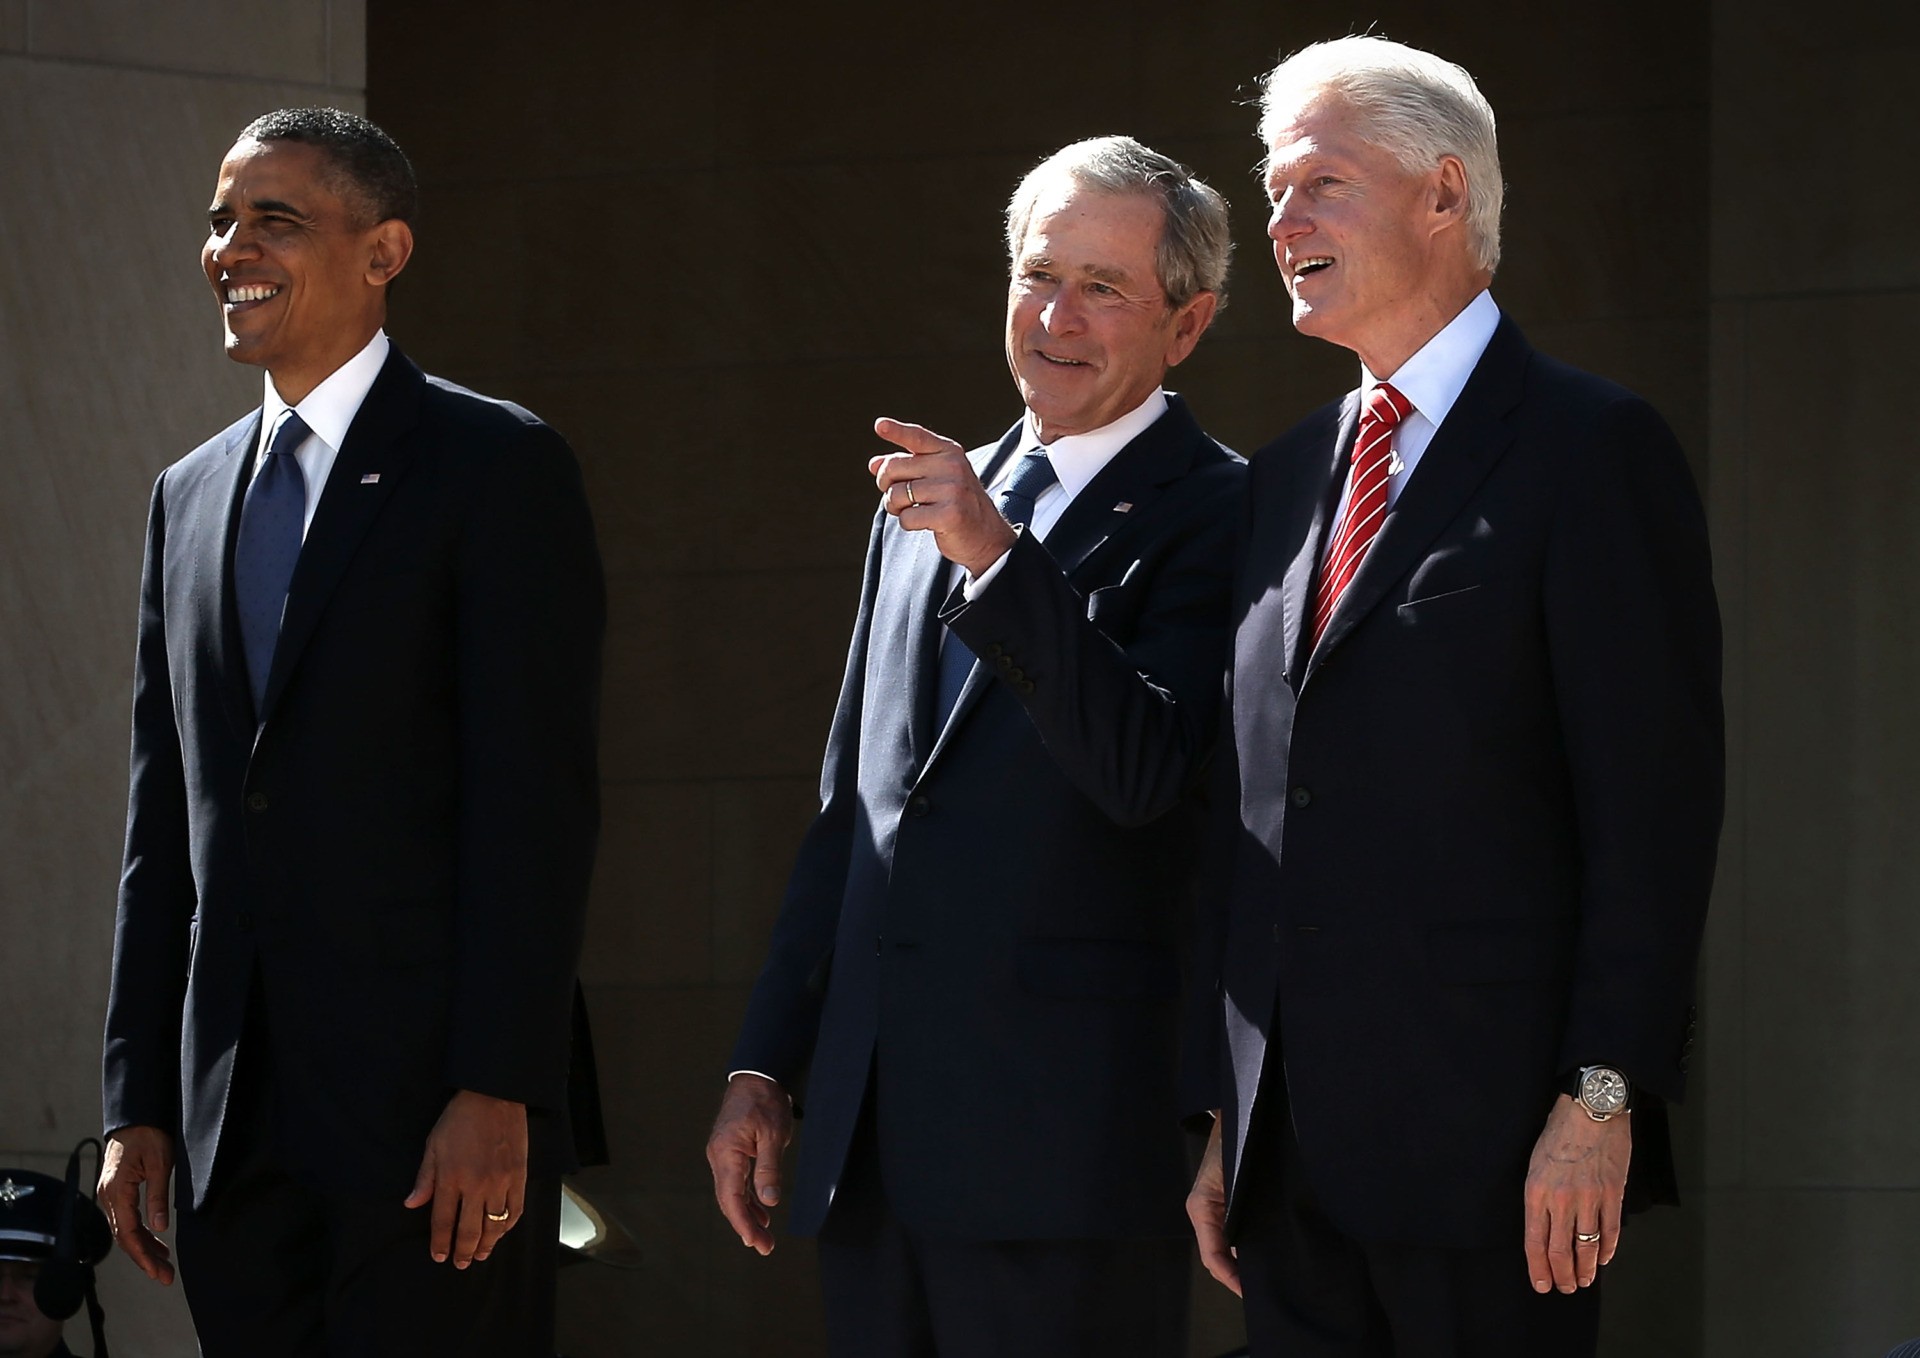 DALLAS, TX - APRIL 25: (L-R) U.S. President Barack Obama, former President George W. Bush, and former President Bill Clinton attend the opening ceremony of the George W. Bush Presidential Center April 25, 2013 in Dallas, Texas. The Bush library, which is located on the campus of Southern Methodist University, with more than 70 million pages of paper records, 43,000 artifacts, 200 million emails and four million digital photographs, will be opened to the public on May 1, 2013. The library is the 13th presidential library in the National Archives and Records Administration system. (Photo by Alex Wong/Getty Images)